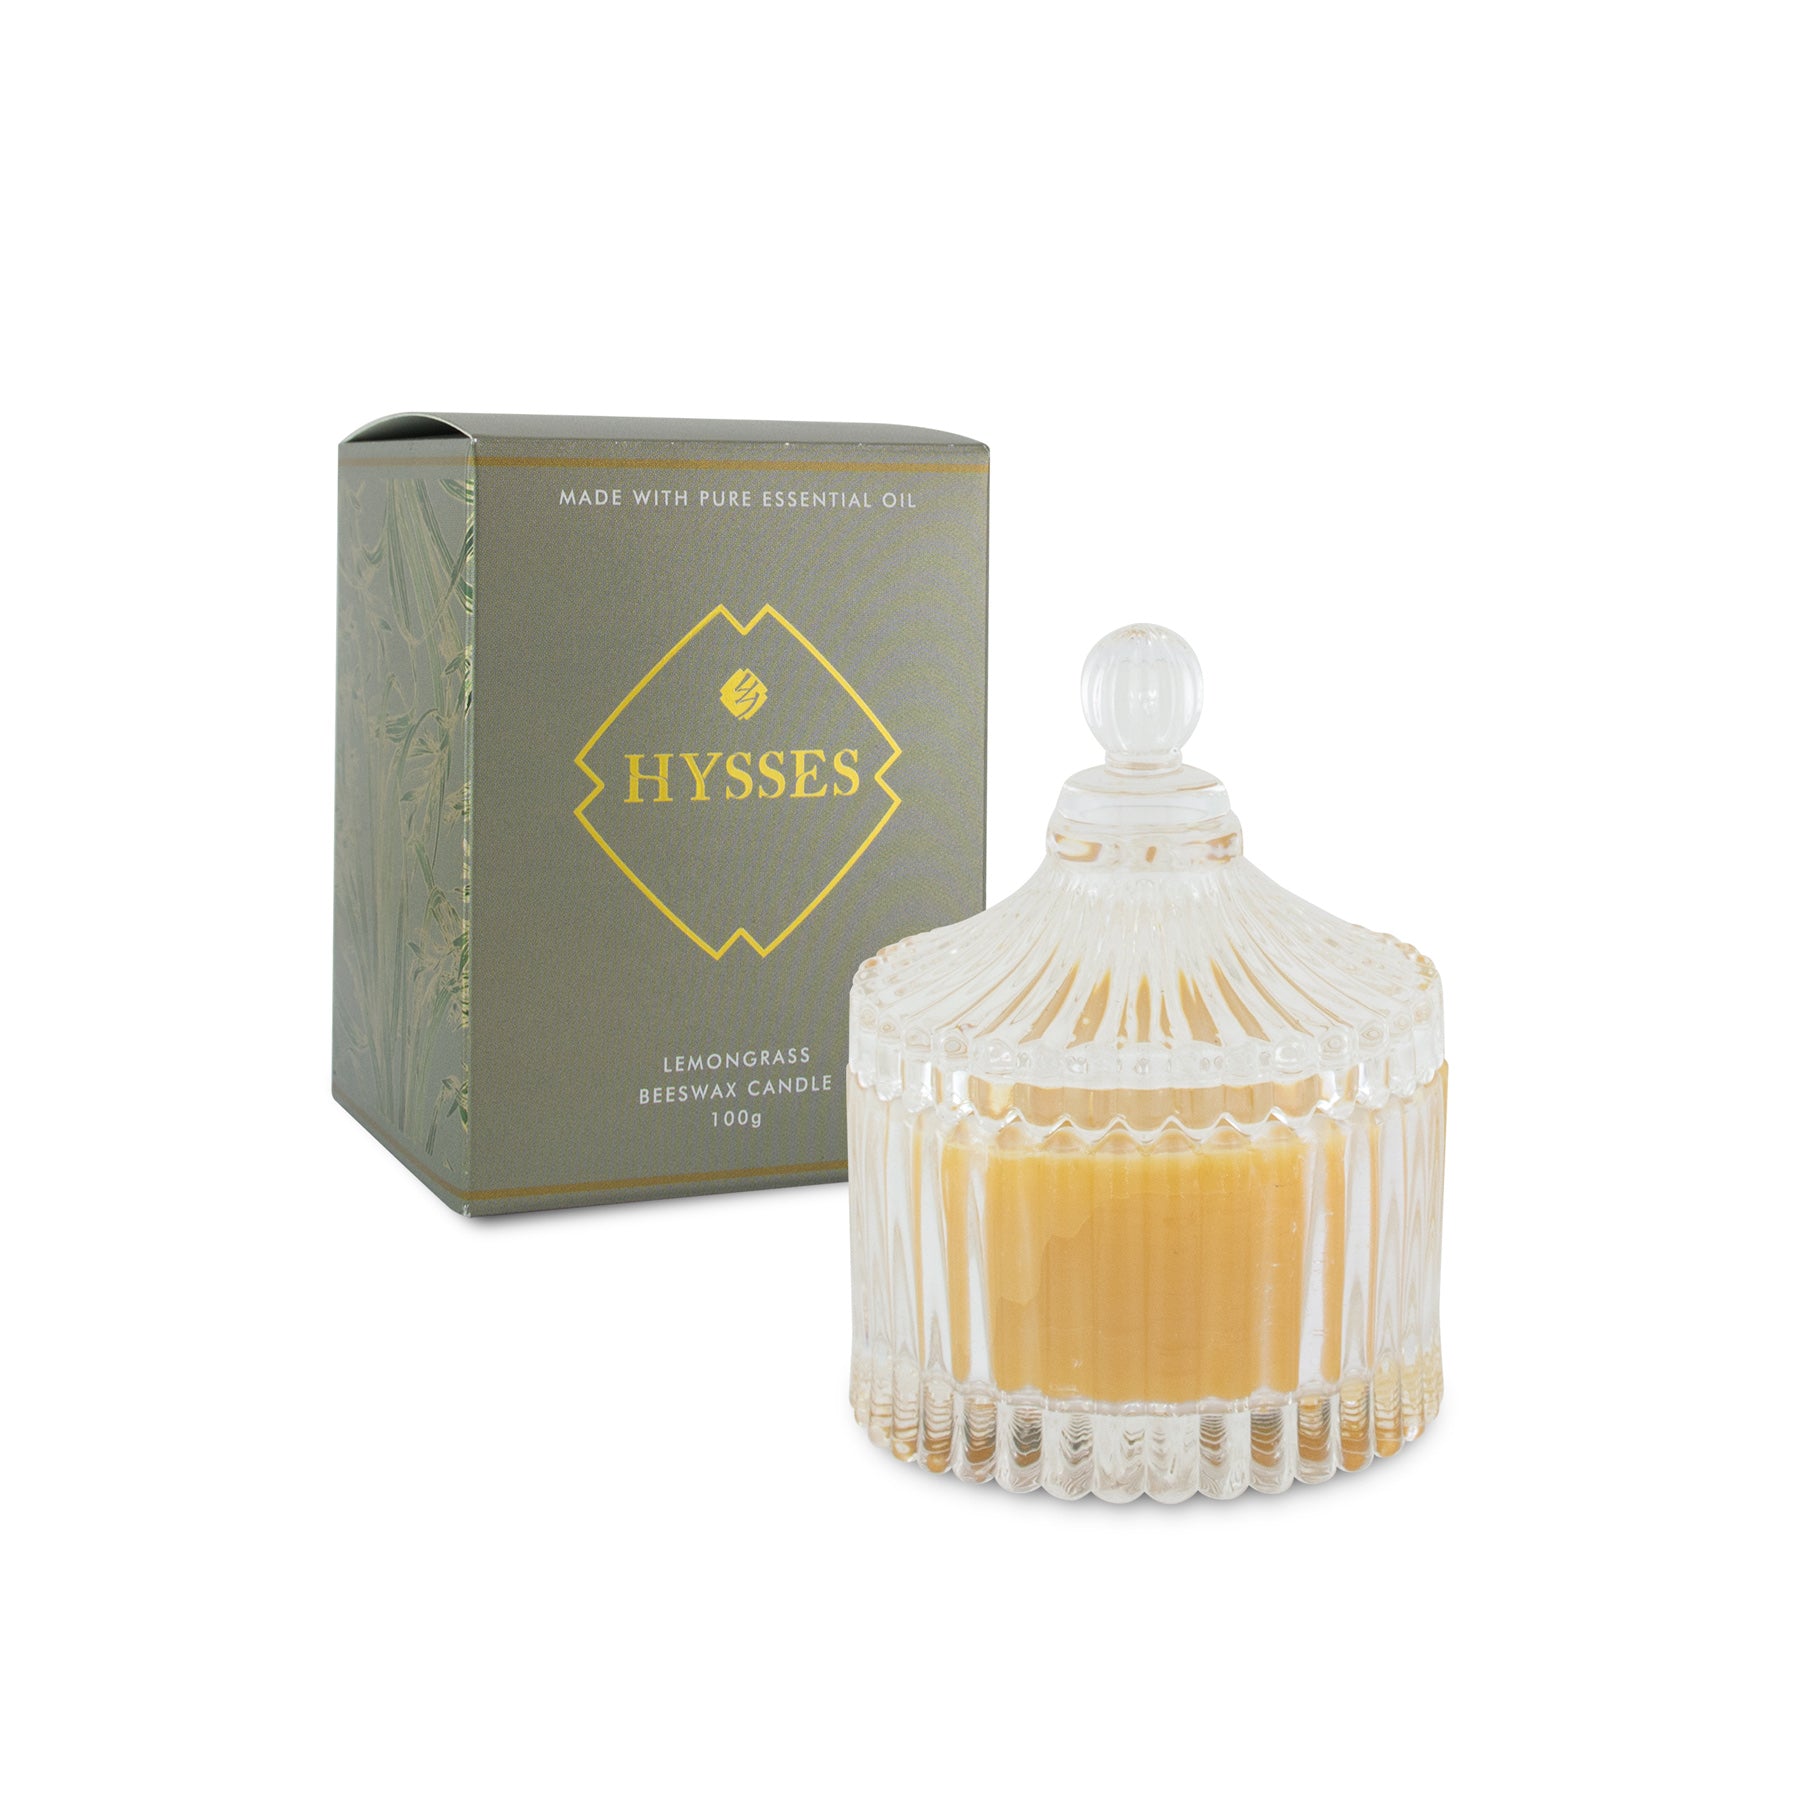 Lemongrass Beeswax Candle - HYSSES